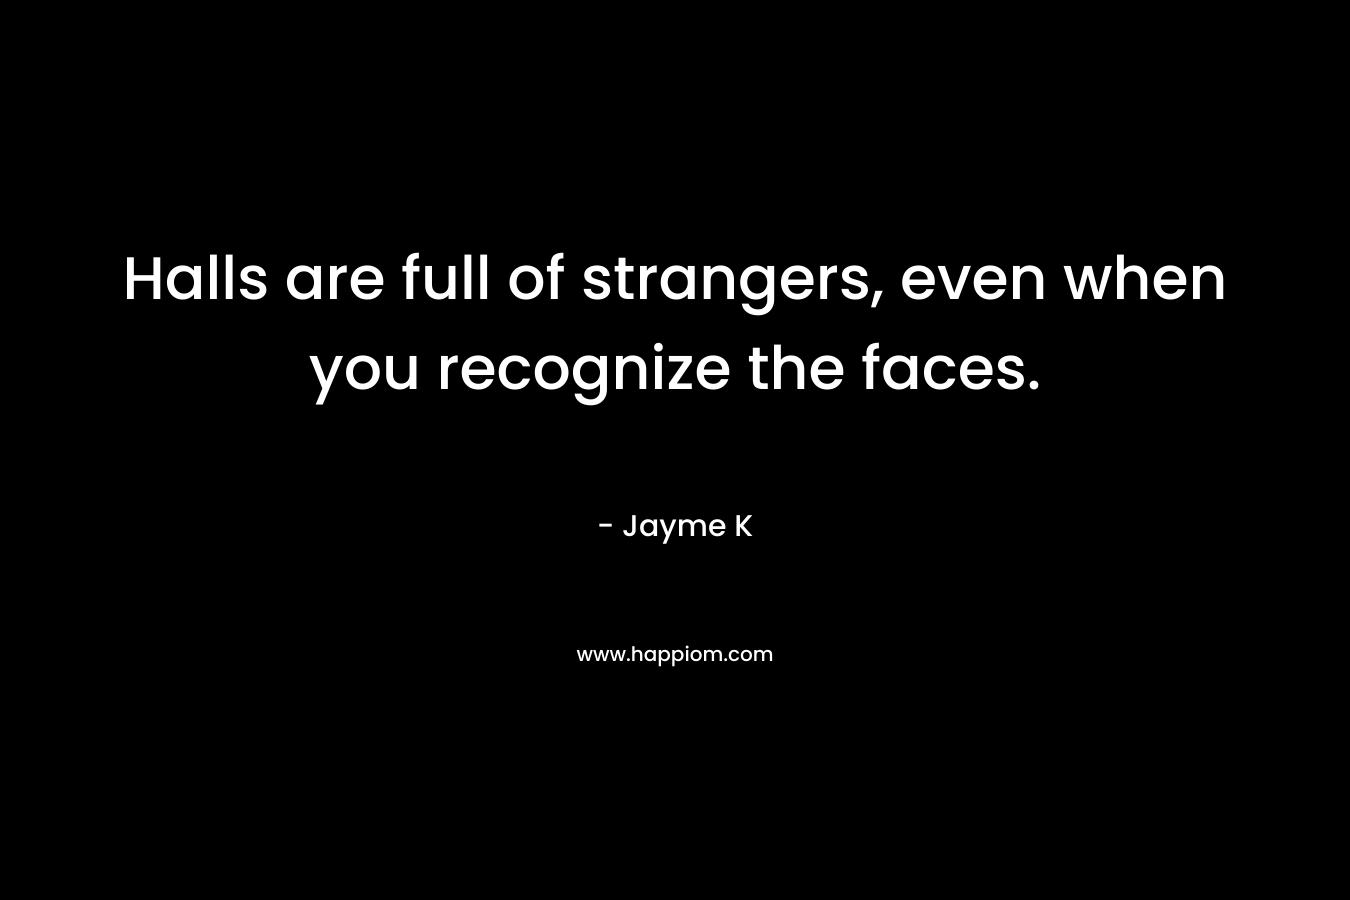 Halls are full of strangers, even when you recognize the faces. – Jayme K